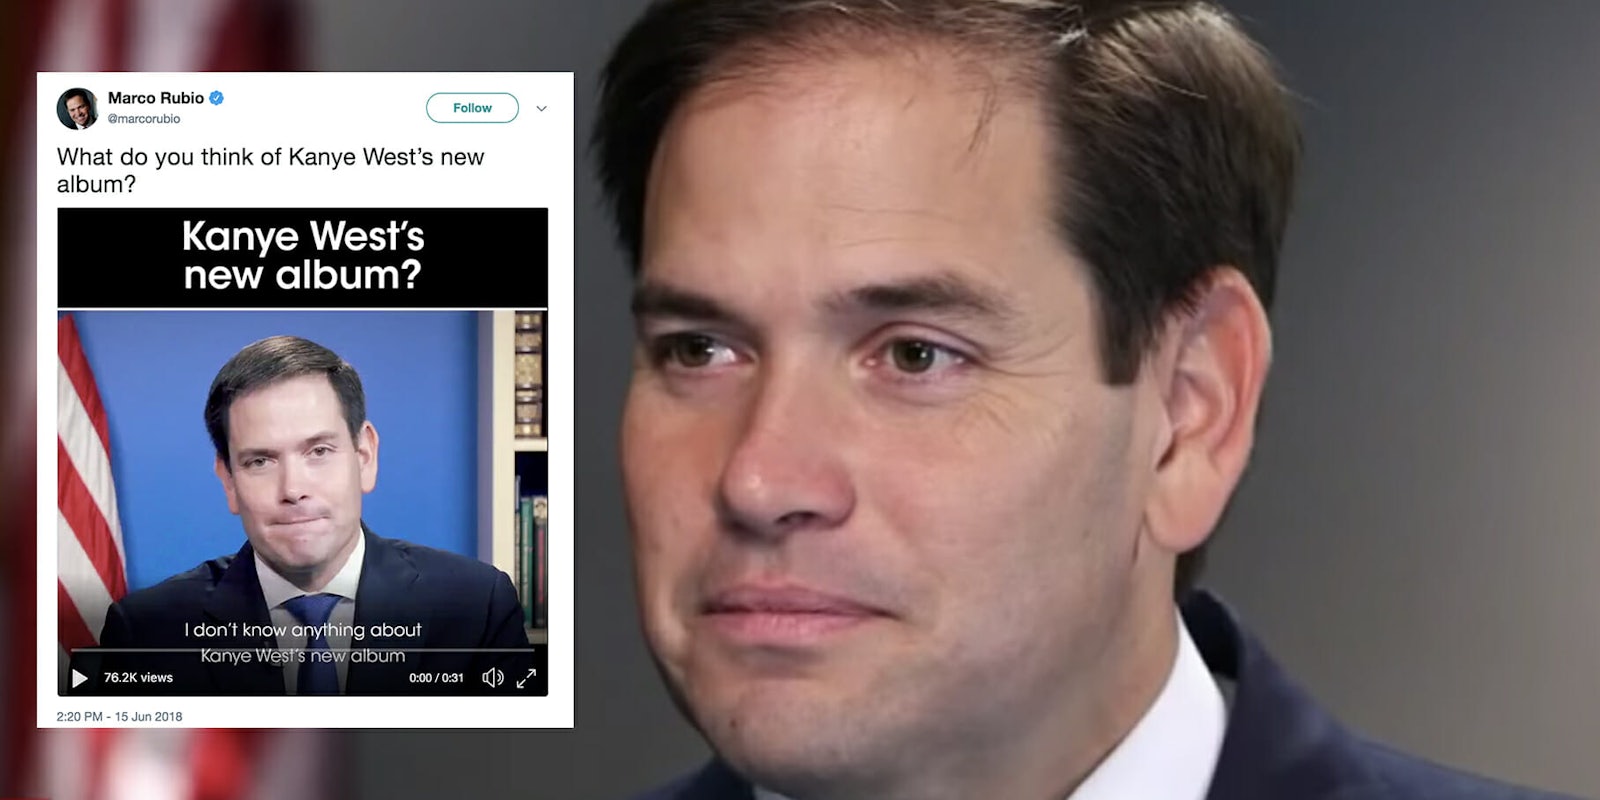 Marco Rubio tweeted a campaign video of him discussing Kanye West's album 'Ye.'